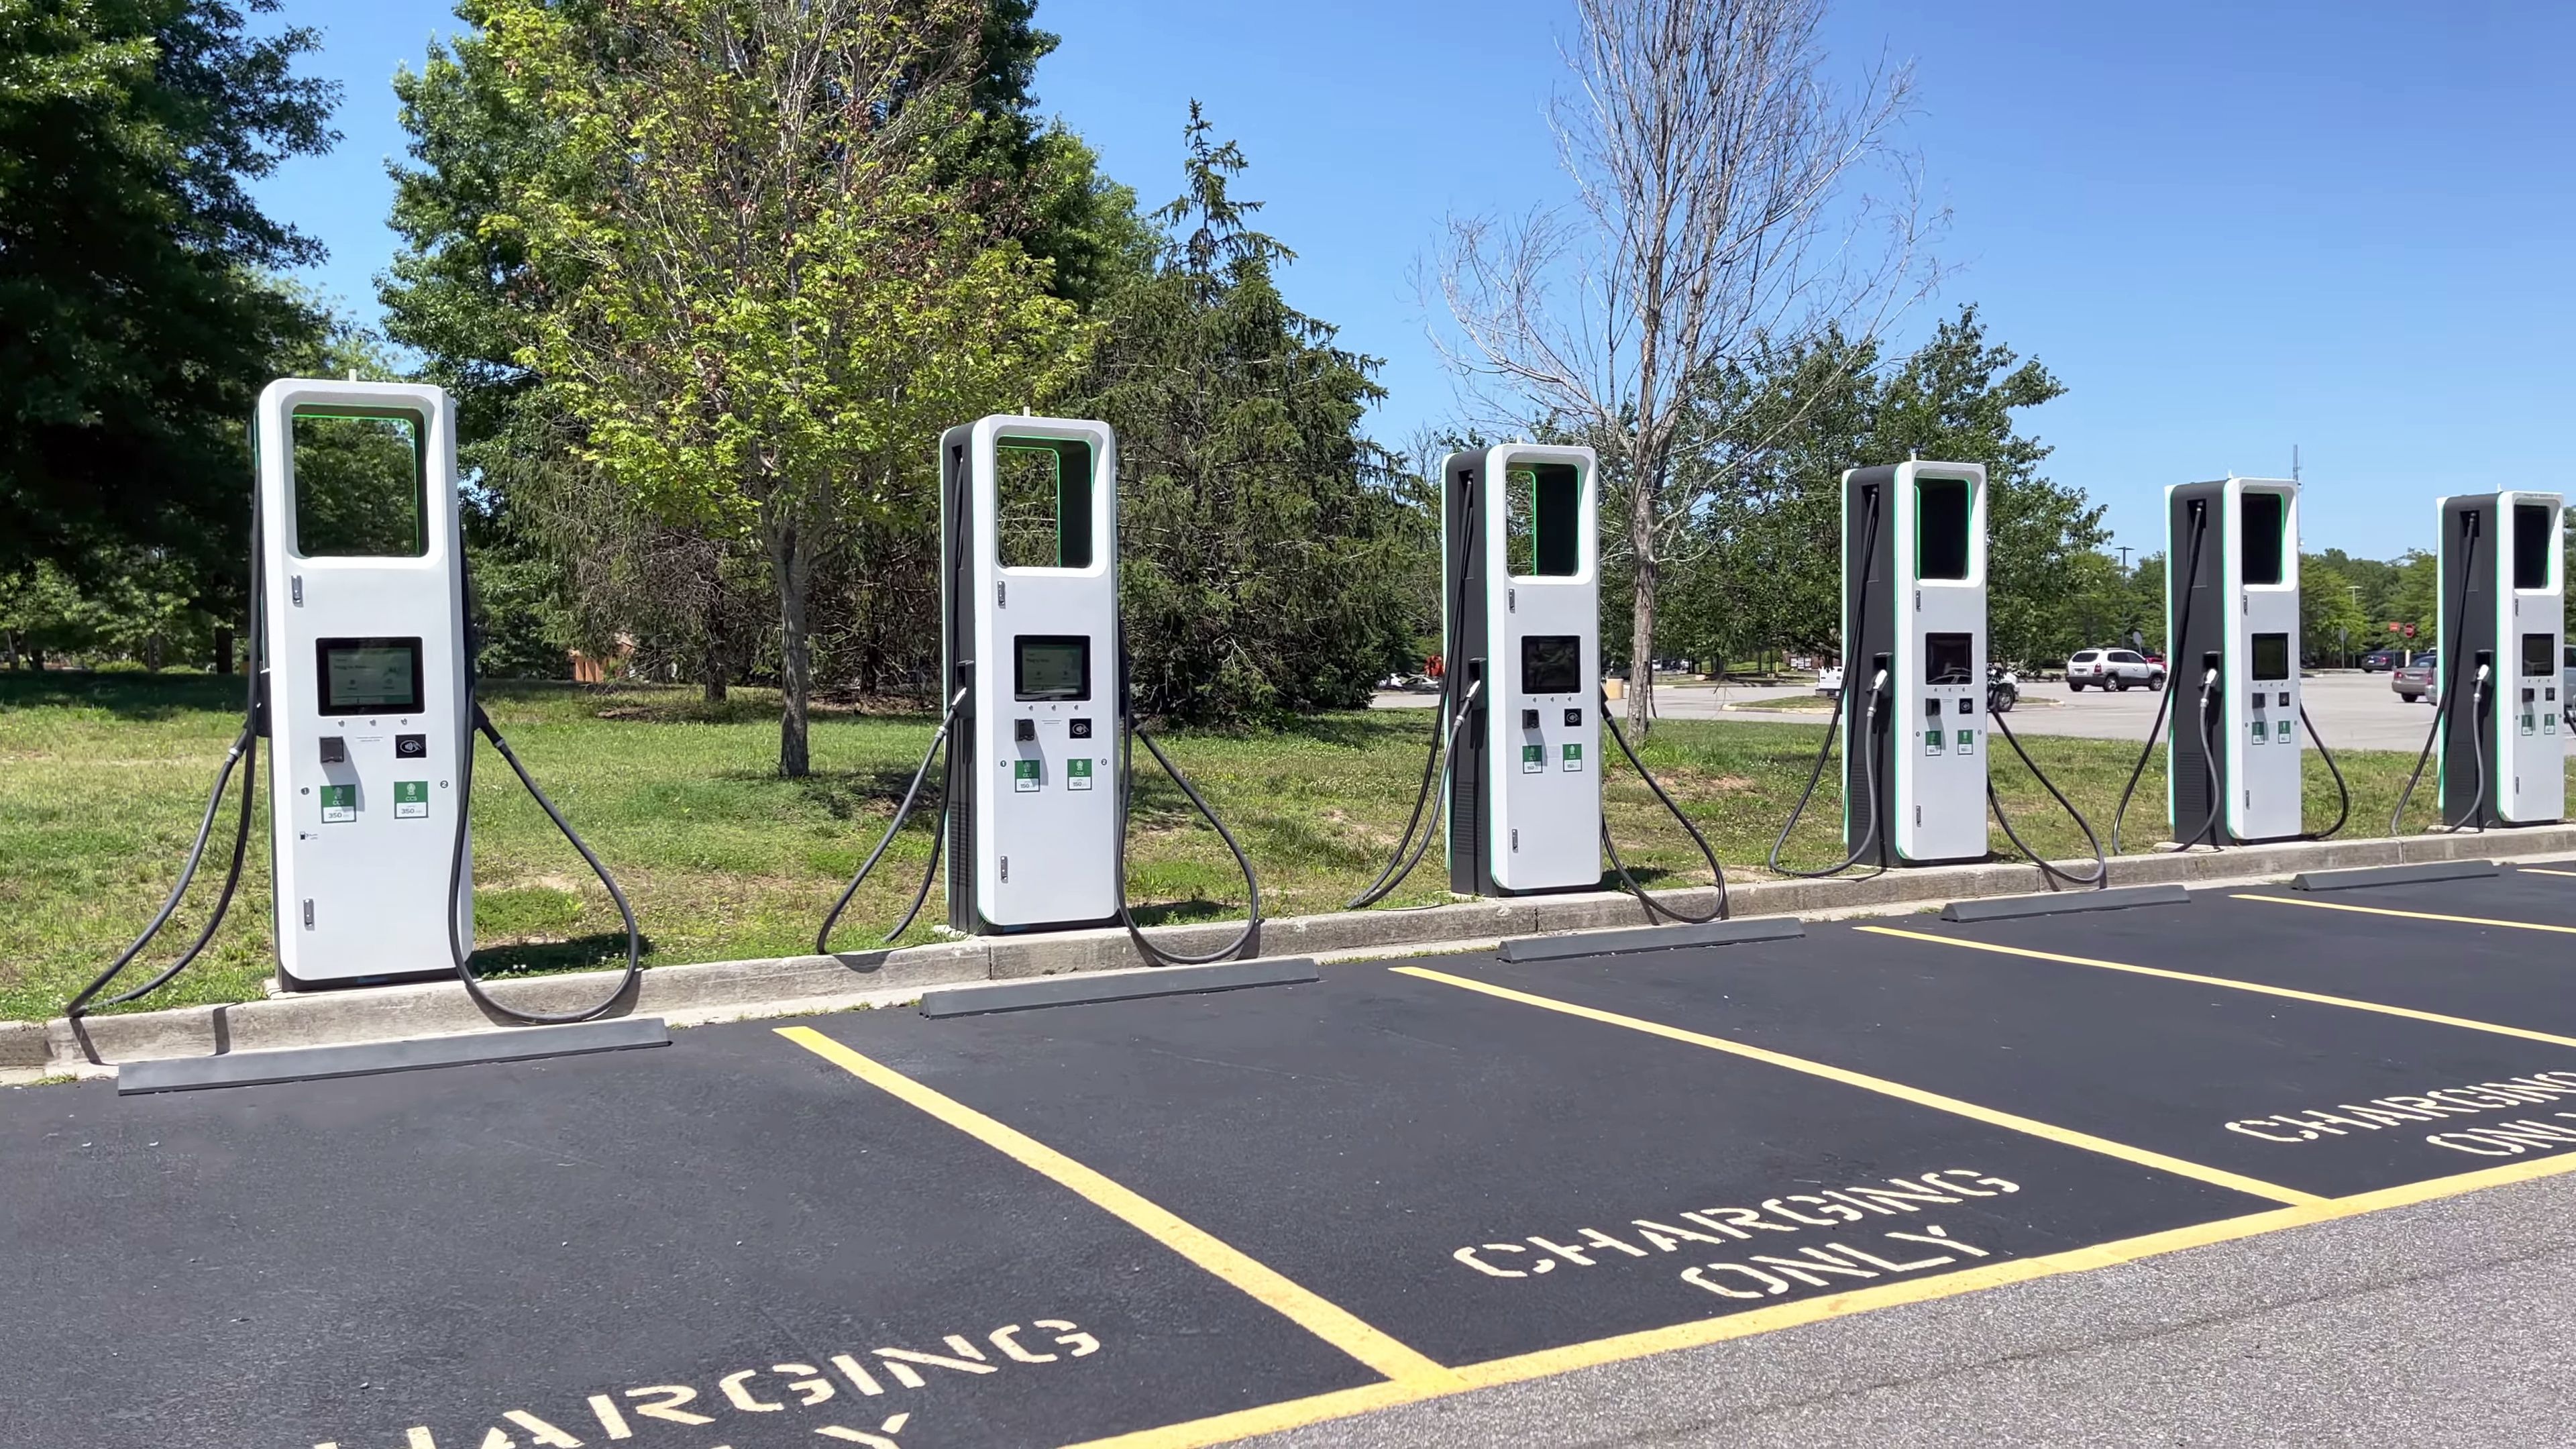 Electrify America, Walmart Announce Completion of Over 120 Charging Stations  at Walmart Stores Nationwide with Plans for Further Expansion